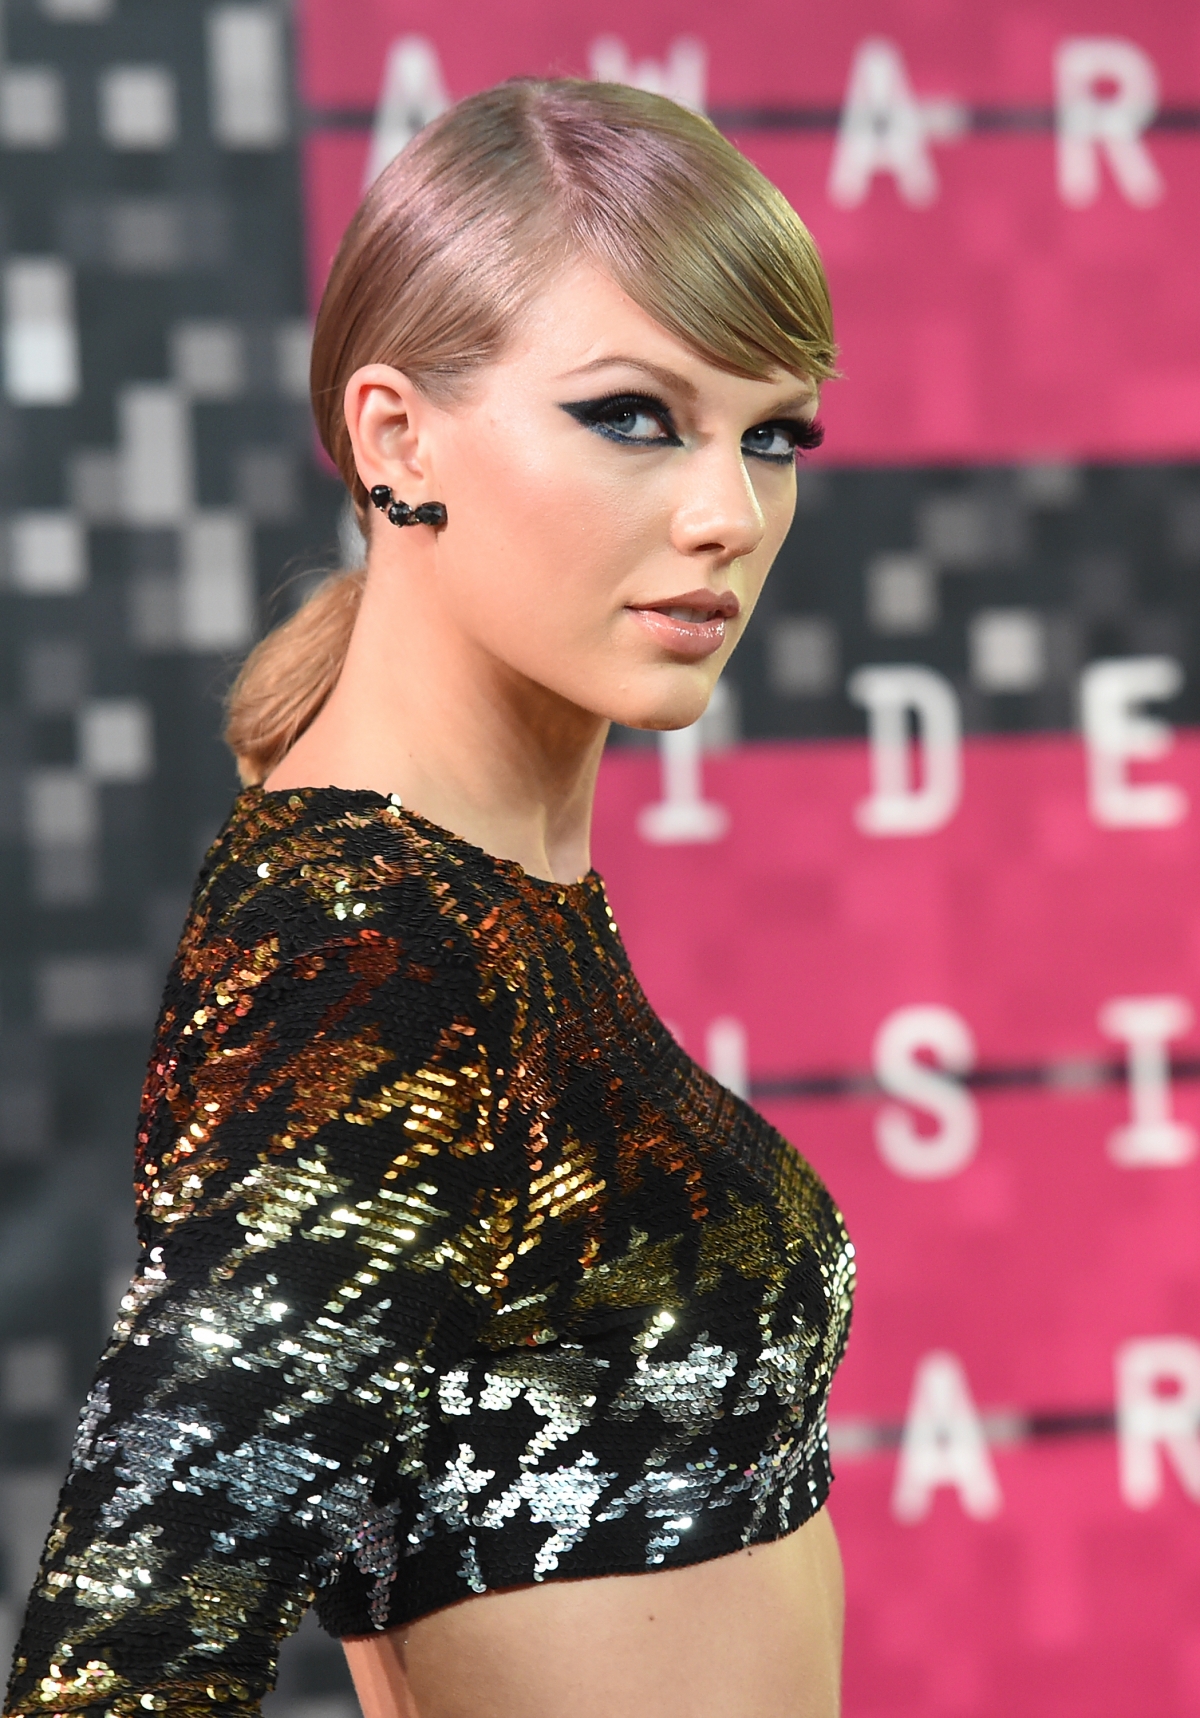 Taylor Swift to cover Playboy? Magazine wants singer to 